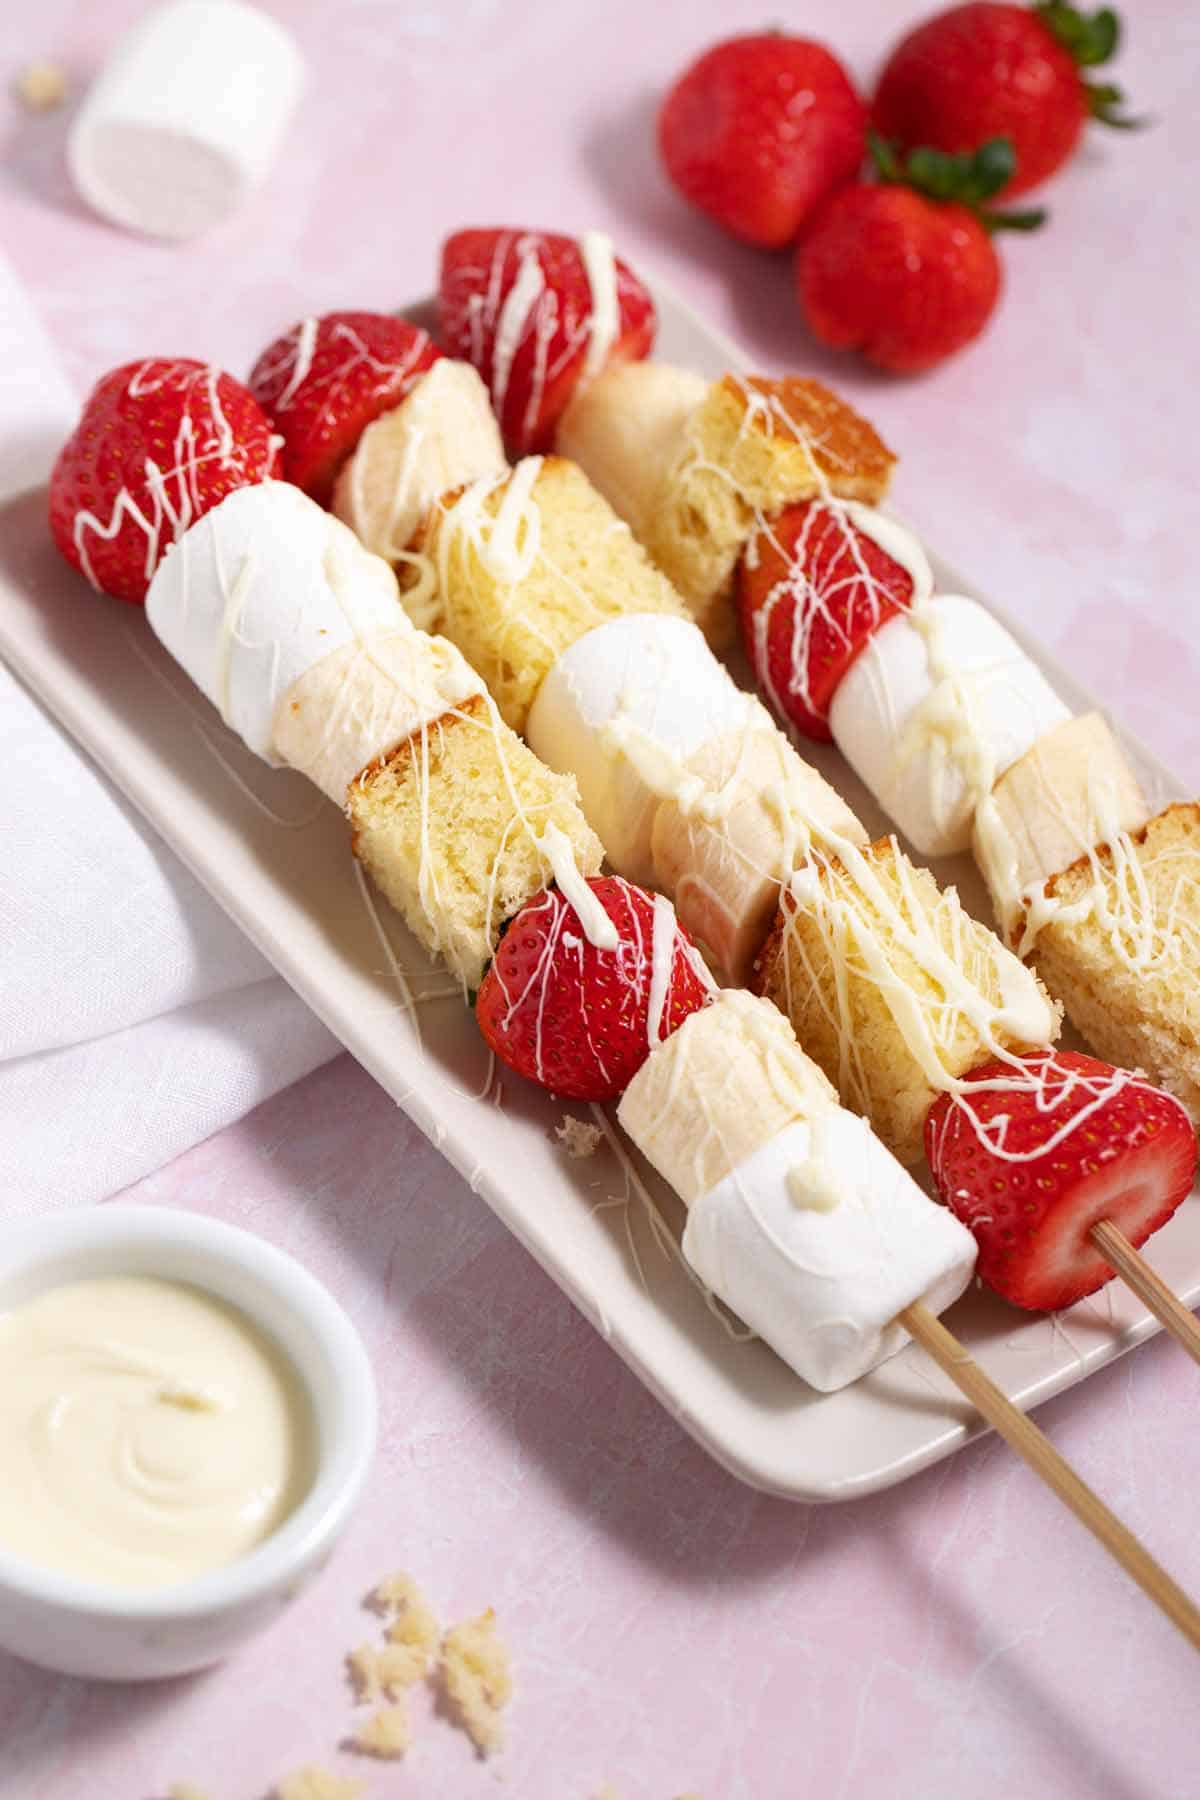 Long dessert skewers with strawberries, bananas, big marshmallows, and cake cubes drizzled with white chocolate with whole strawberries in the background.